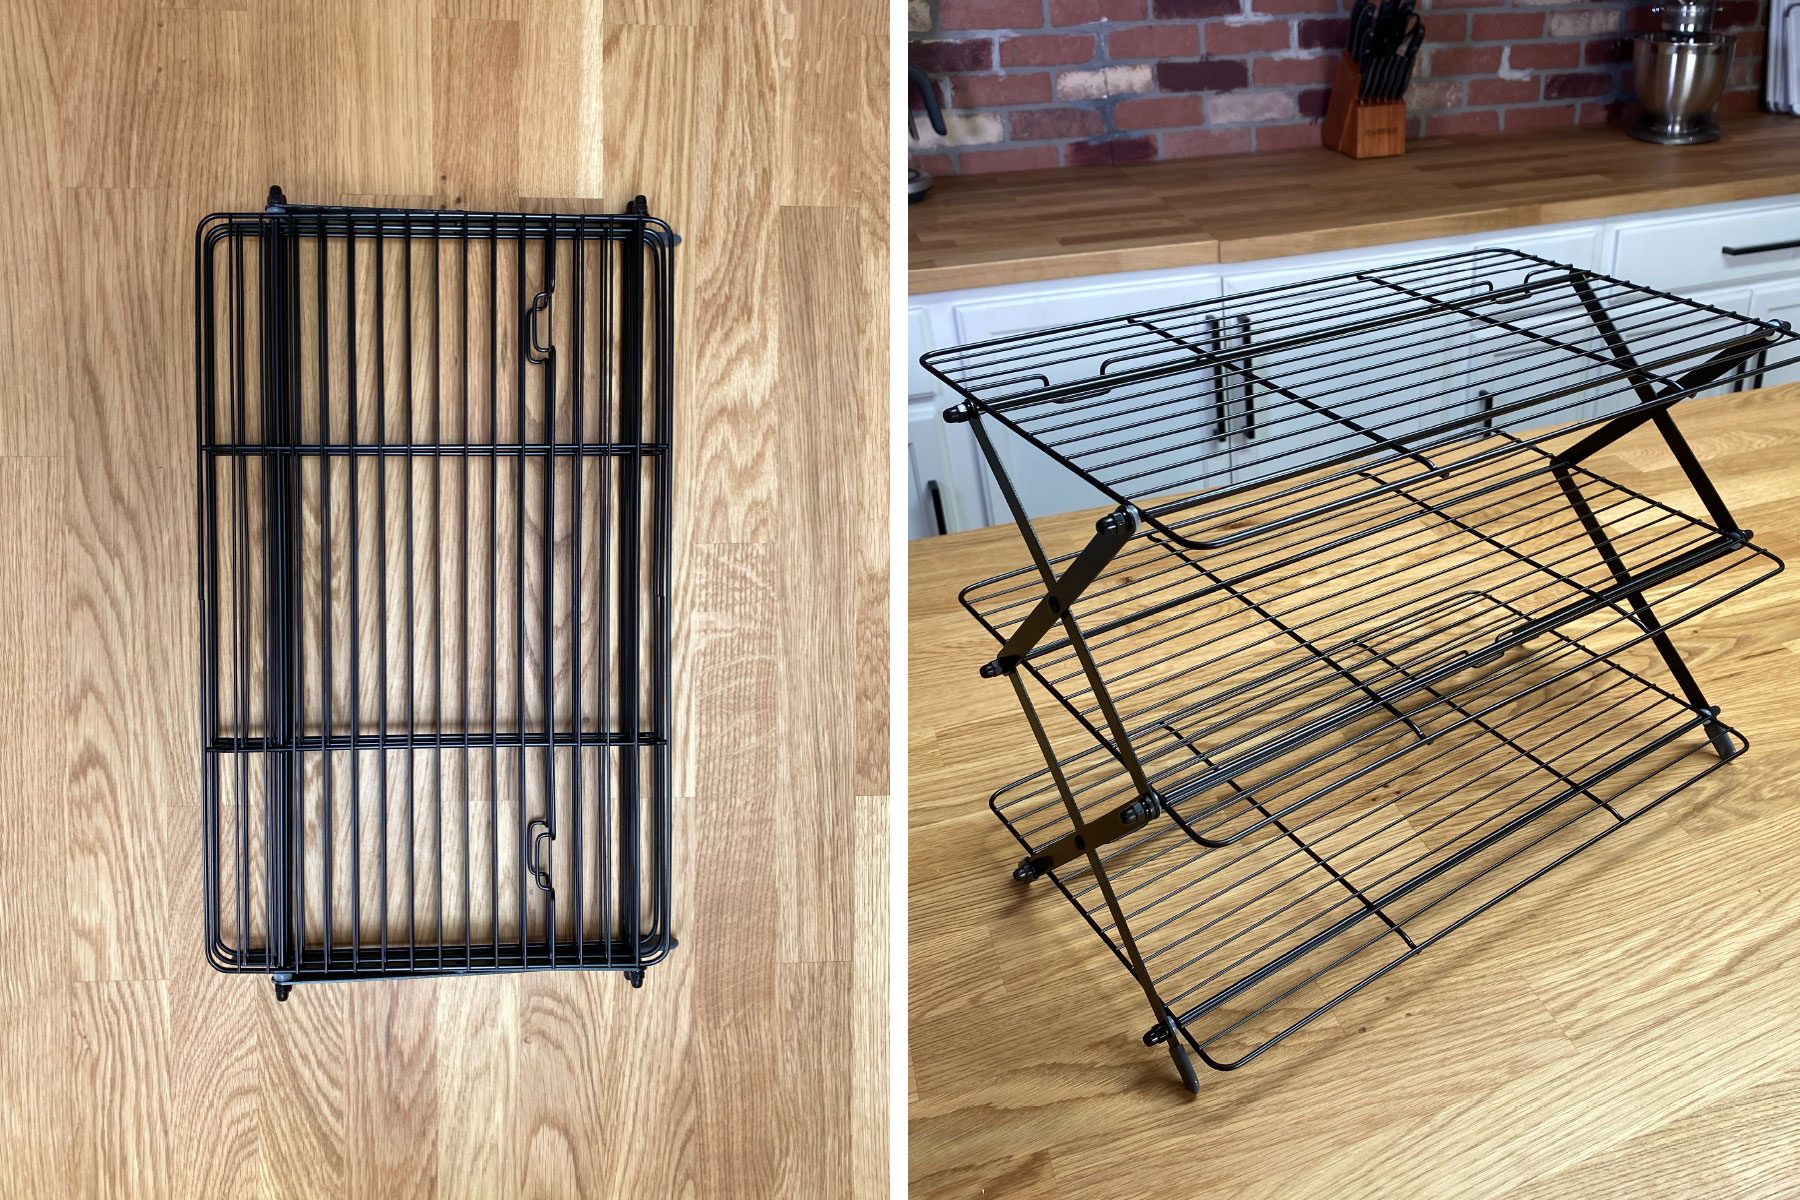 https://www.tasteofhome.com/wp-content/uploads/2023/06/This-Collapsible-Baking-Rack-Offers-Triple-the-Cookie-Cooling-Space_CoolingRack3_Madi-Koetting-Taste-of-Home_YVedit_B-A.jpg?fit=680%2C454